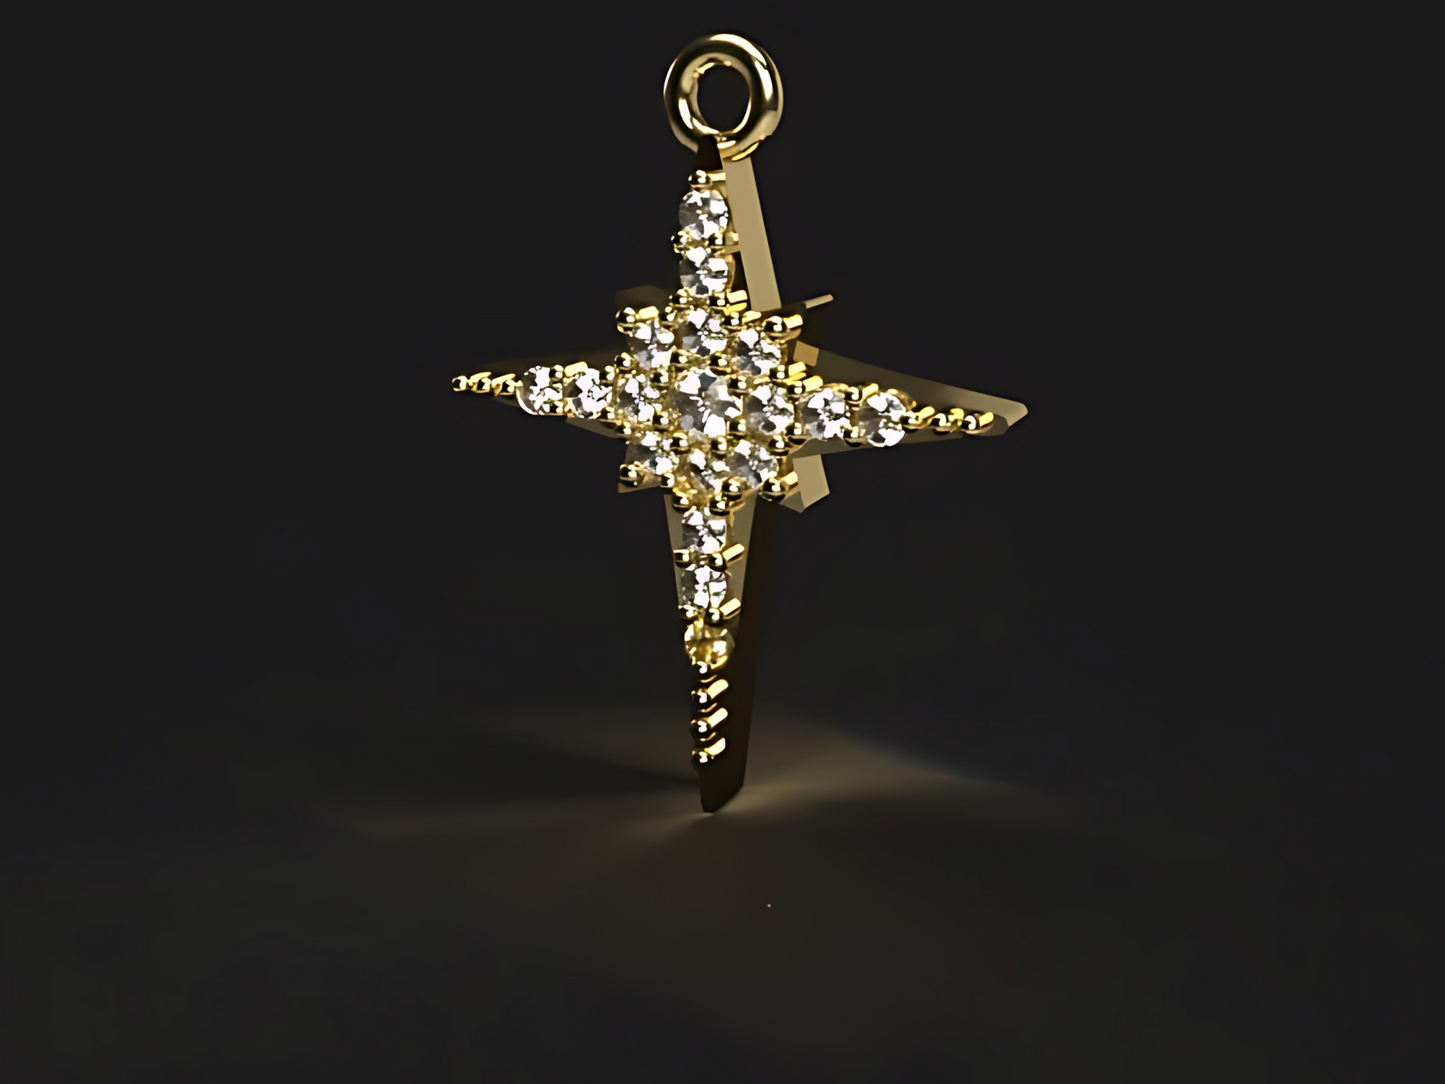 Handmade gold star pendant for necklace with natural 2 ct. Vs high quality Diamonds.